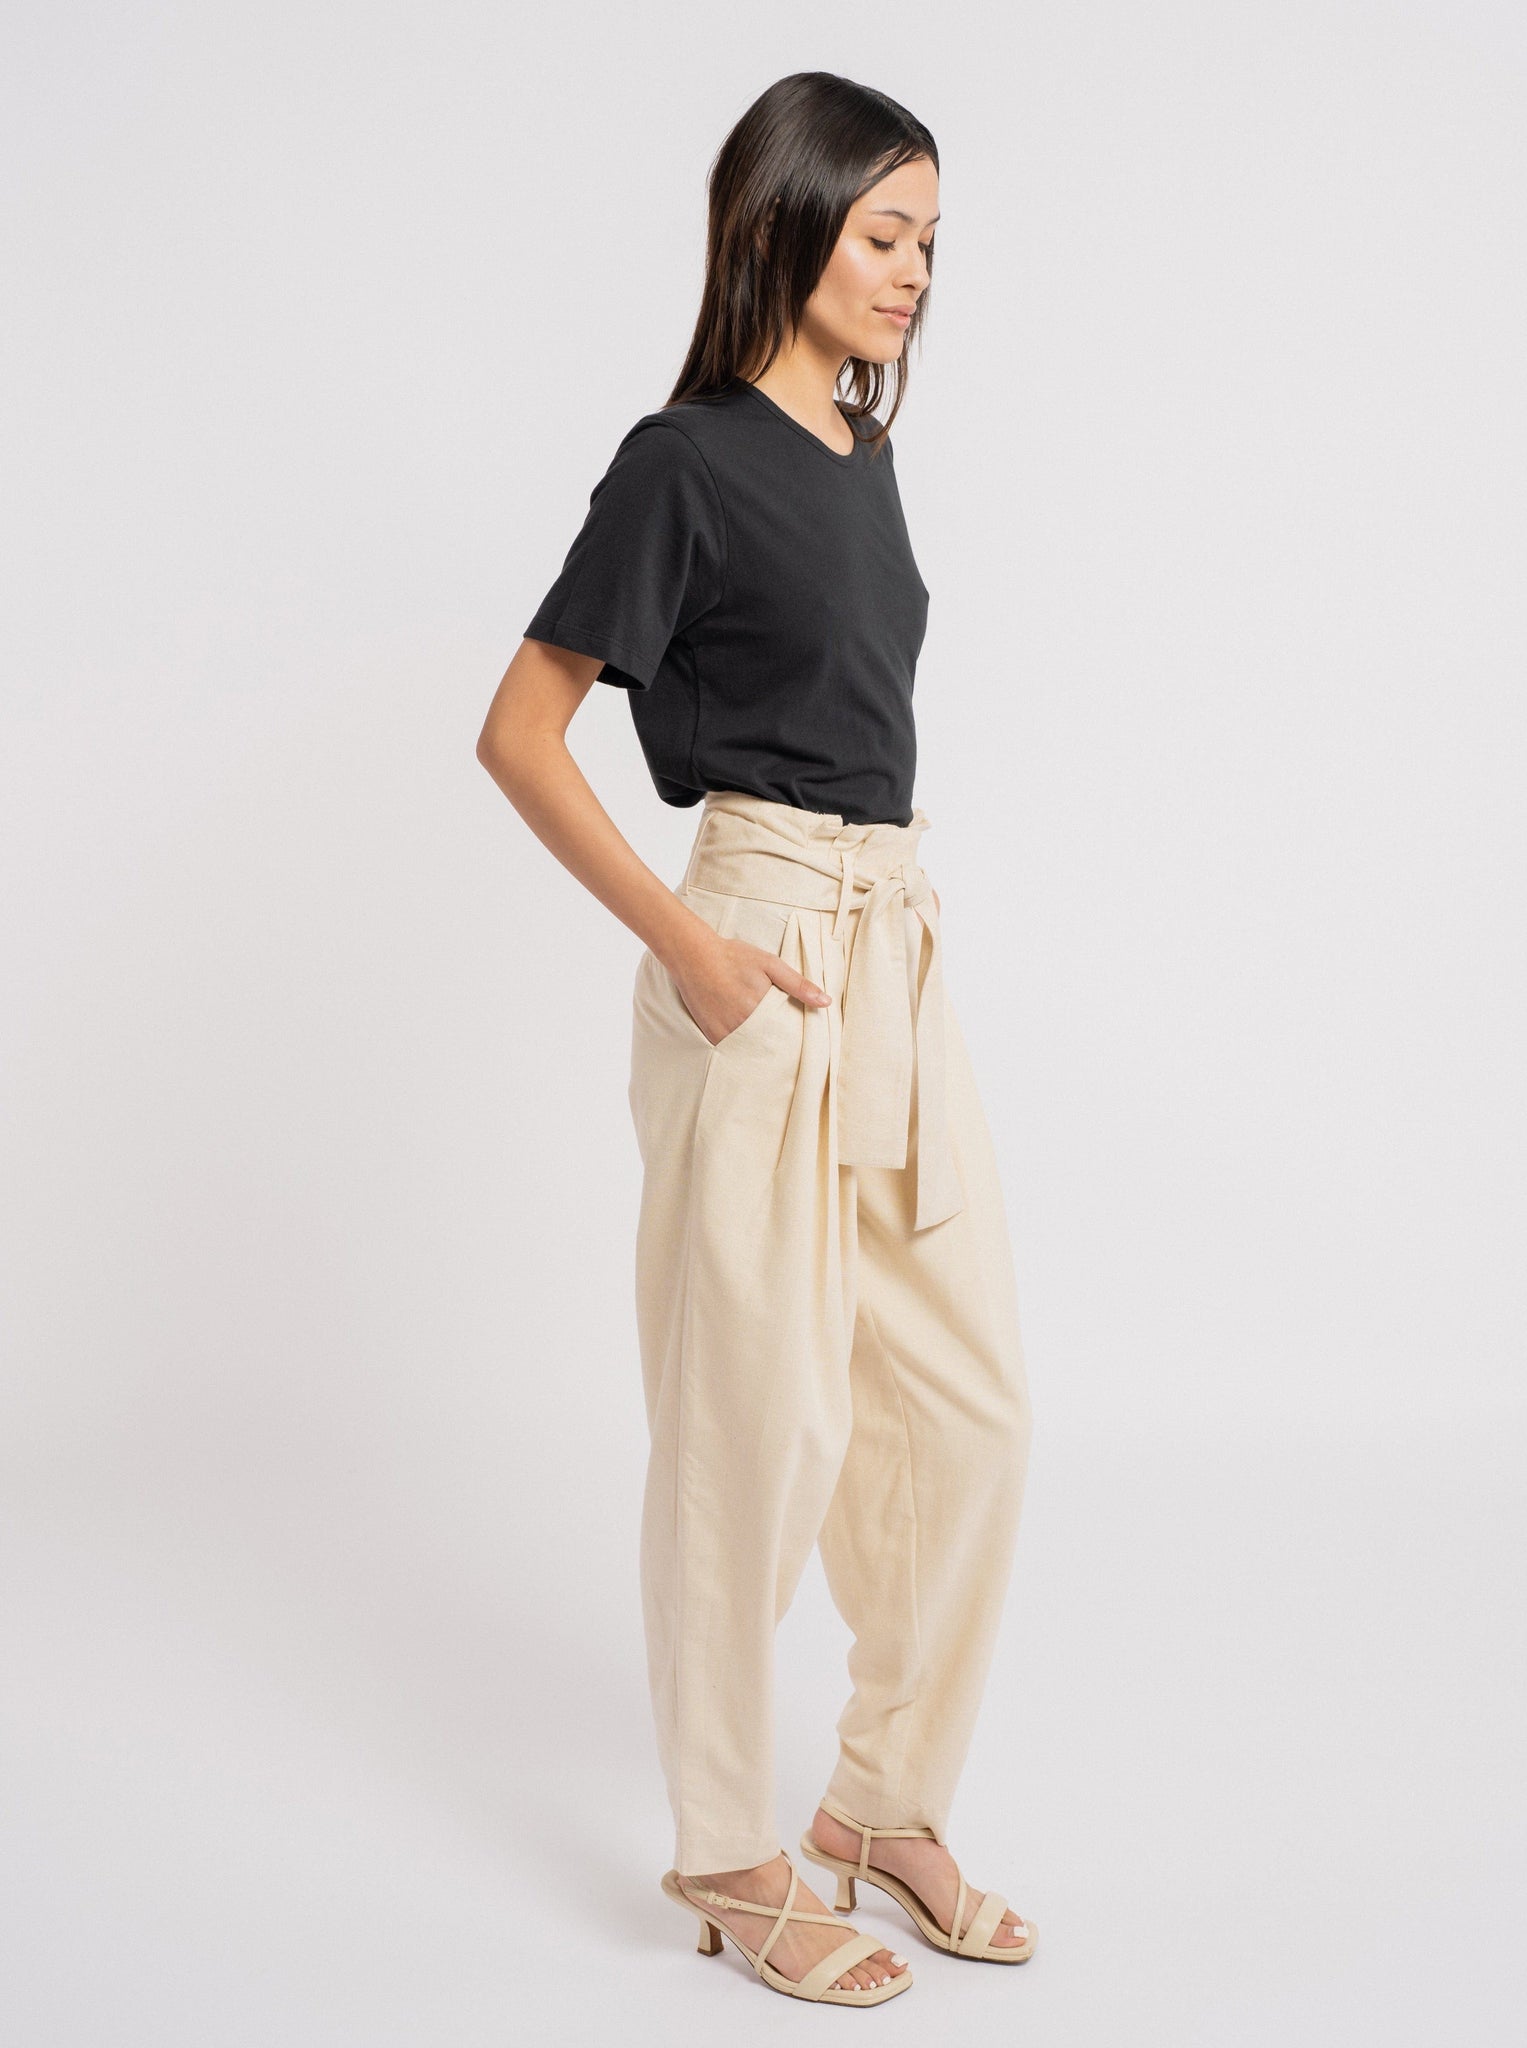 The model is wearing a black t-shirt and Traveler Pant - Ecru Silk Noil - Sample.